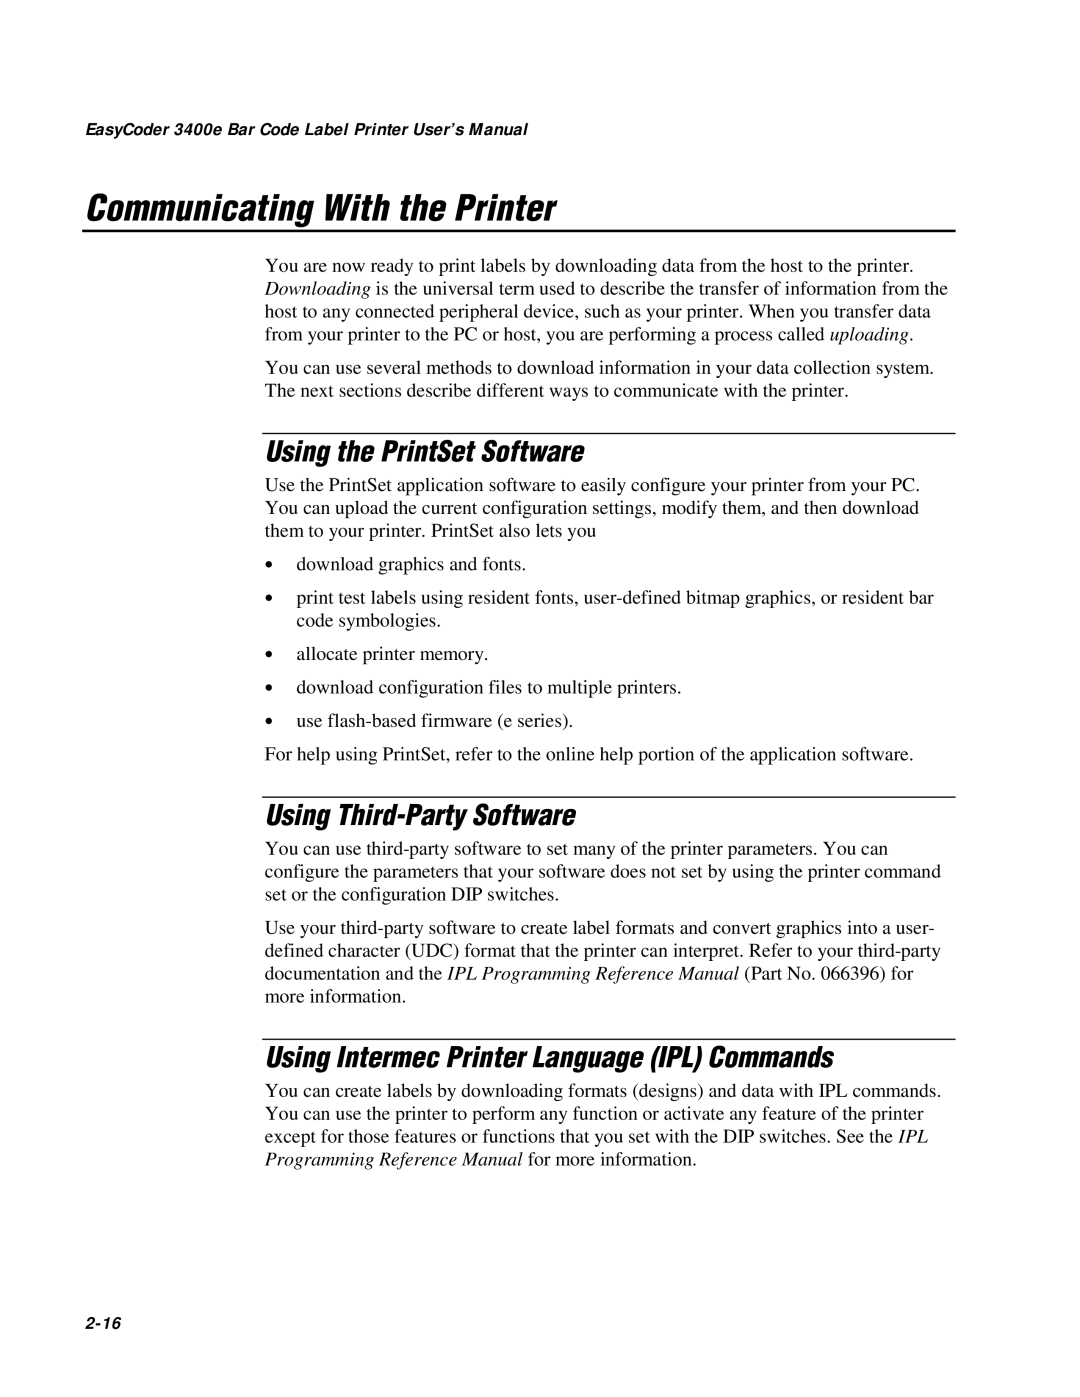 IBM EasyCoder 3400e Communicating With the Printer, Using the PrintSet Software, Using Third-Party Software, 2-16 